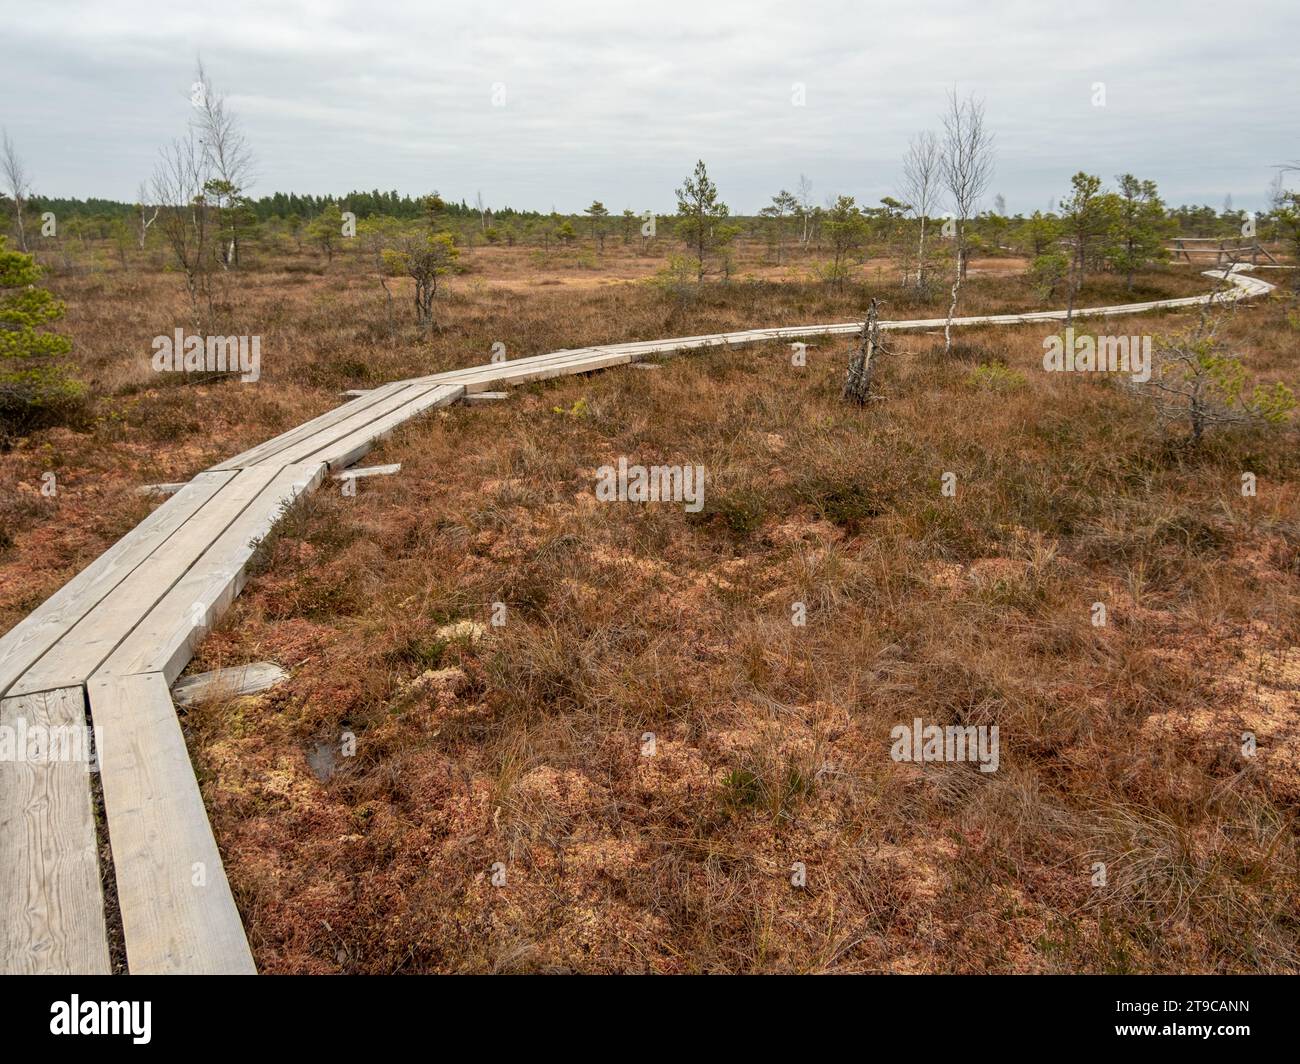 Follow this rustic trail, where weathered planks weave stories of the marsh's serenity amidst nature's untouched beauty. Stock Photo